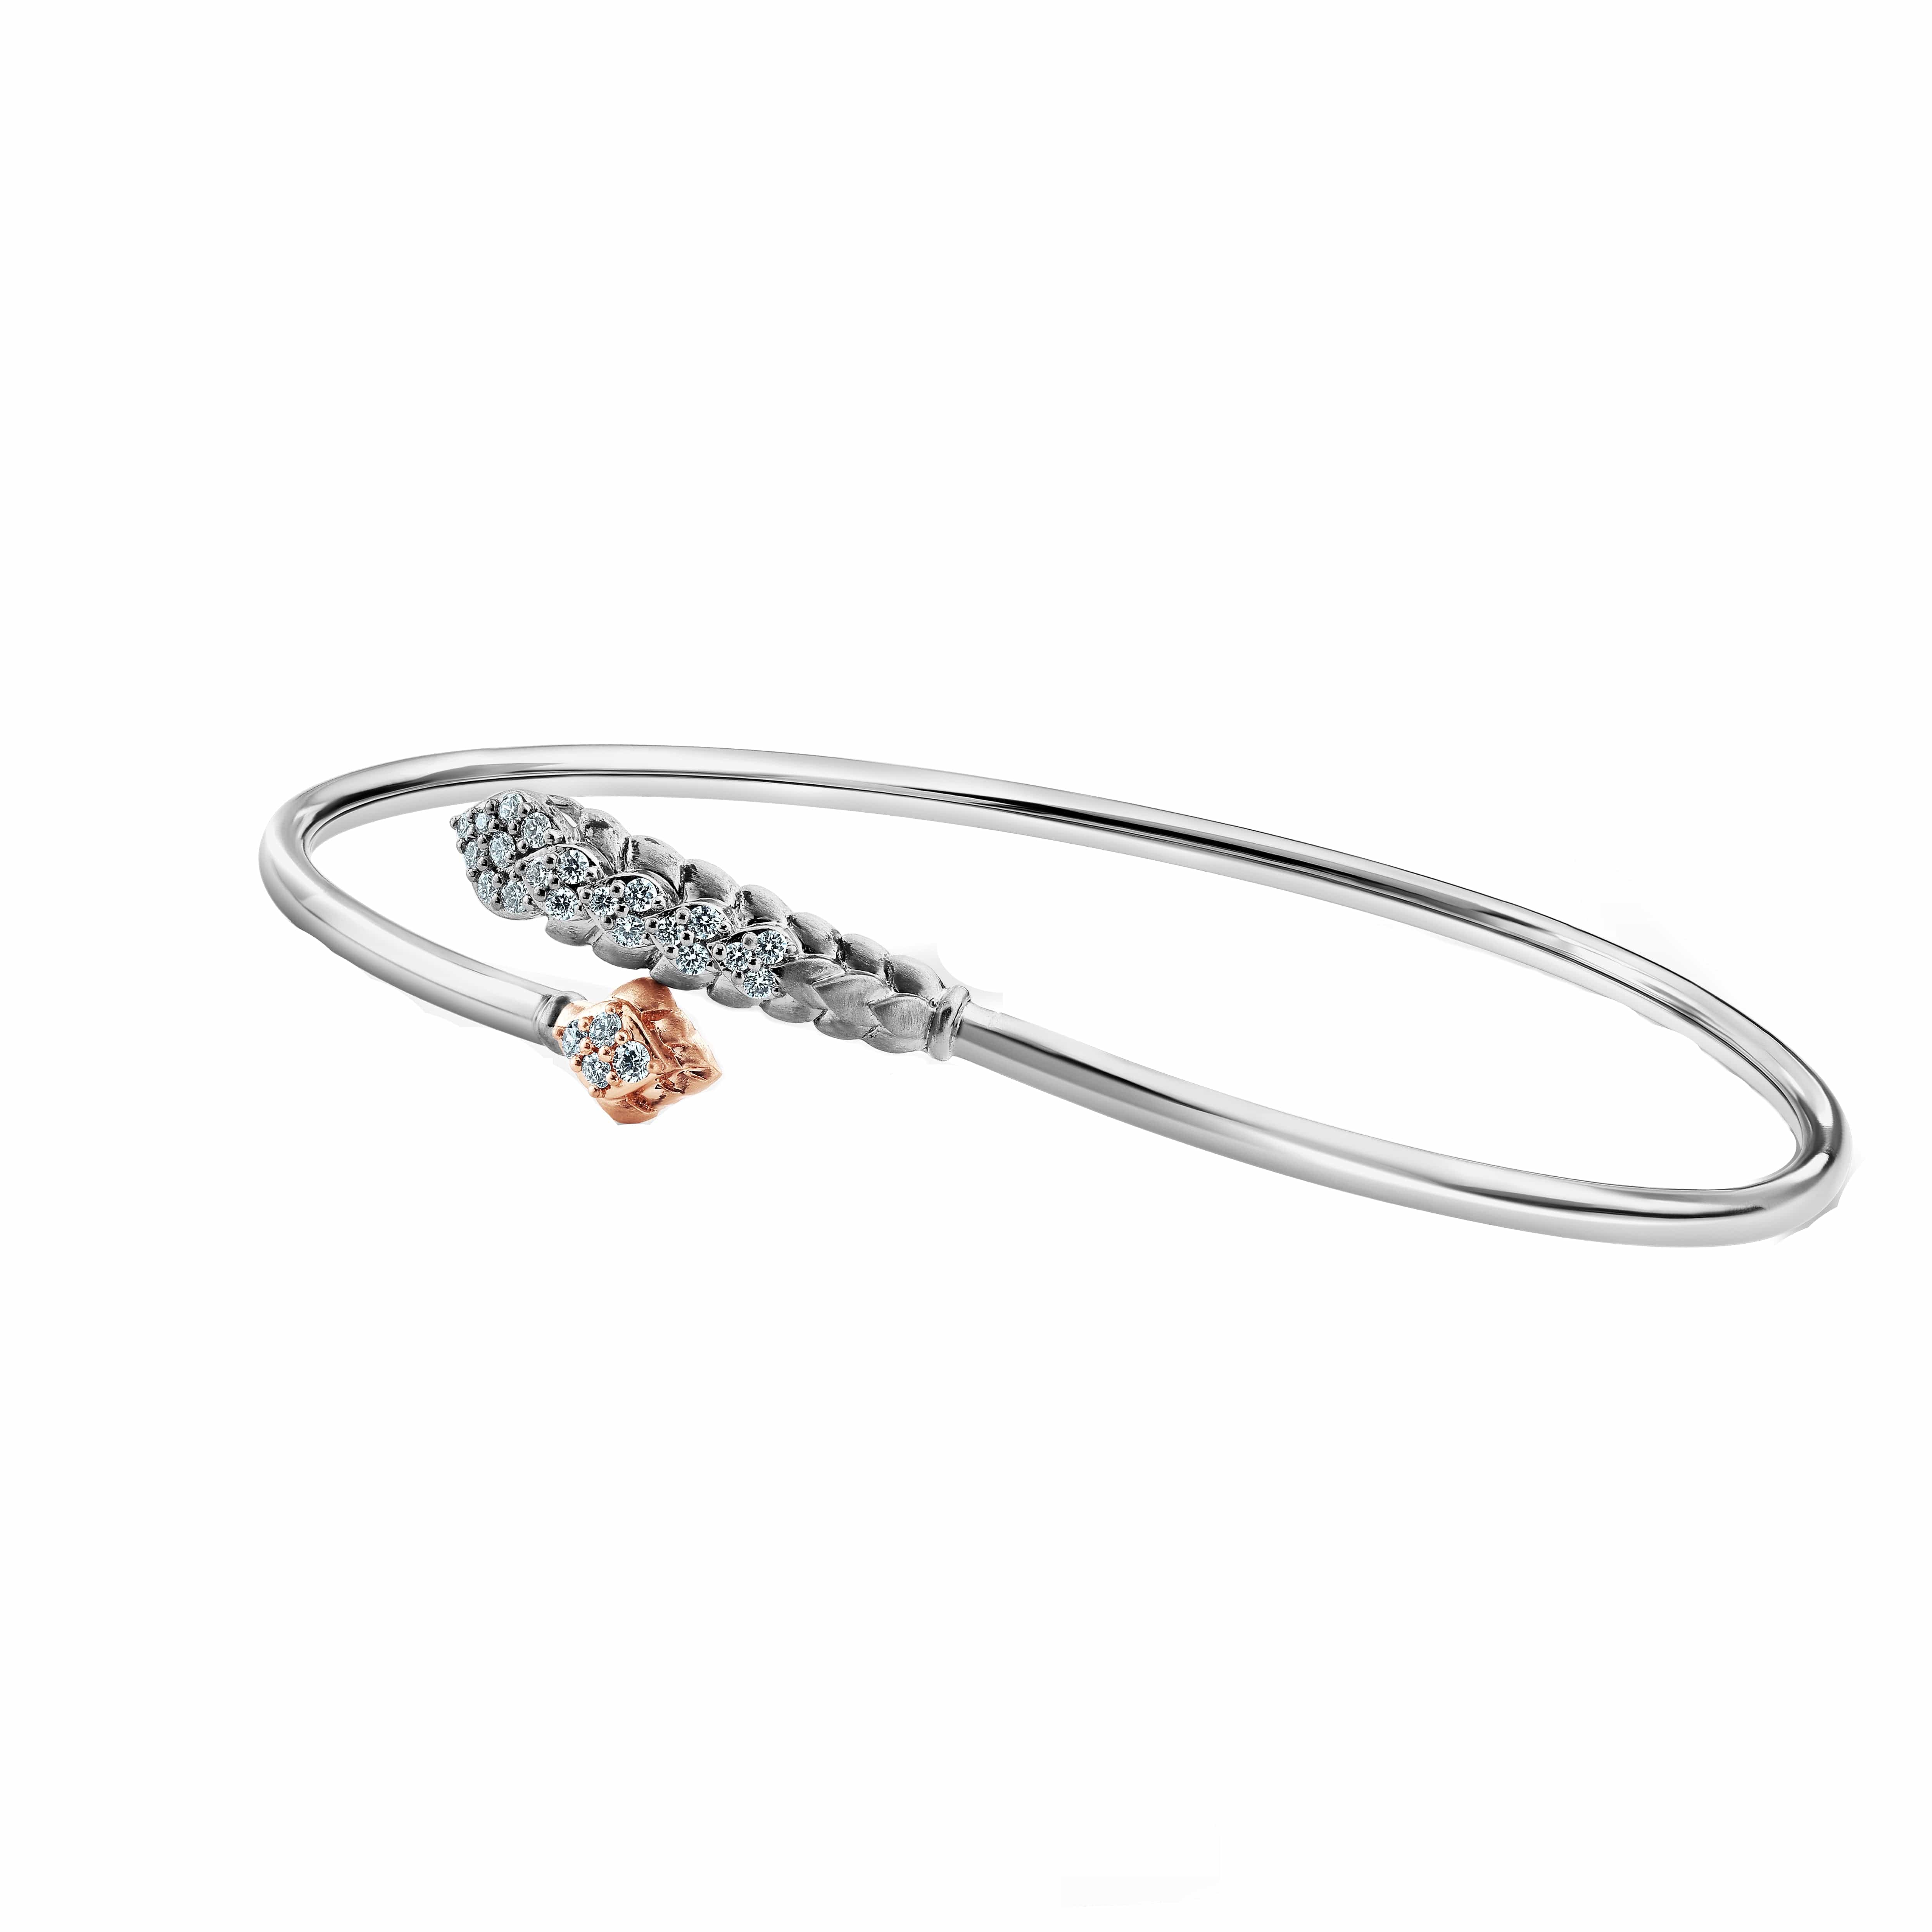 14KT White Gold Diamond Eloise Baguette Bangle | Diamond bangles bracelet,  Diamond bracelet design, Dope jewelry accessories